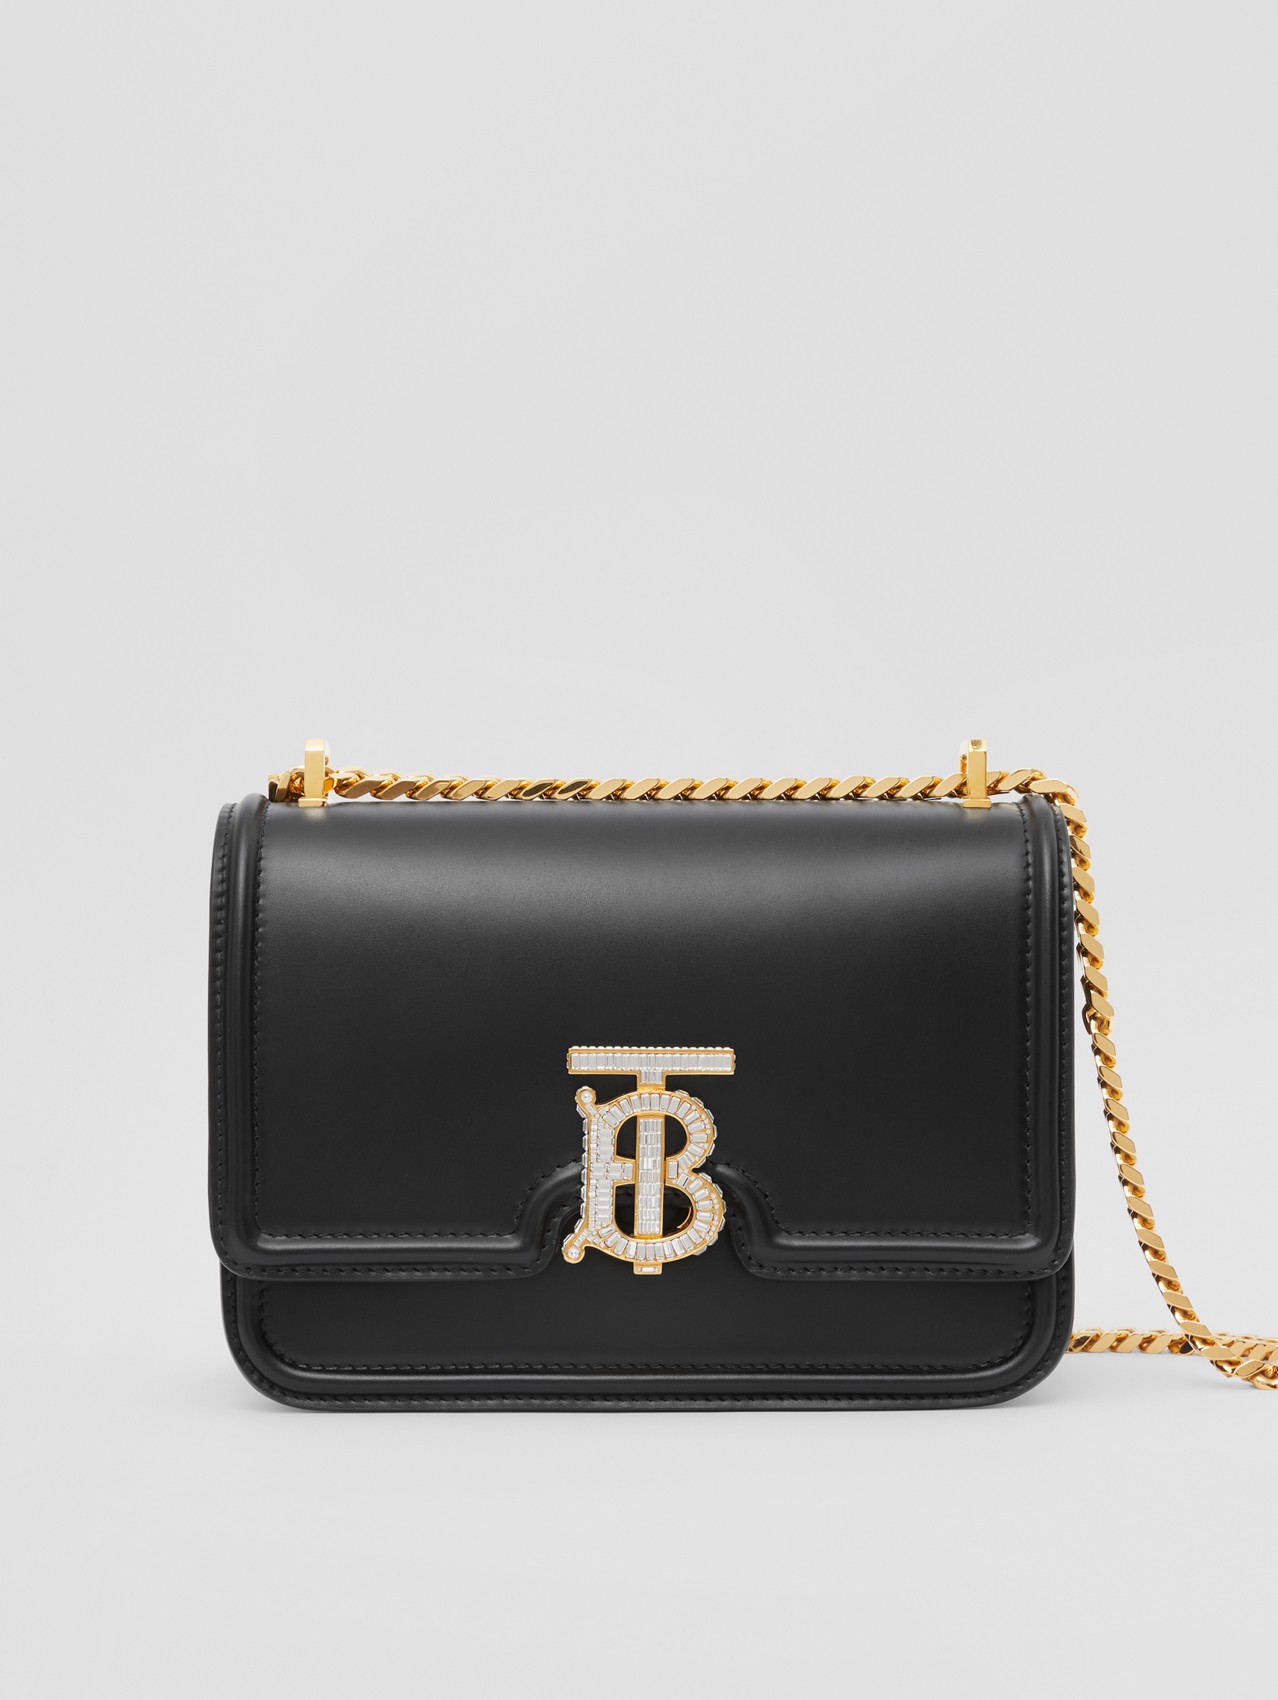 The TB Bag Collection | Burberry® Official